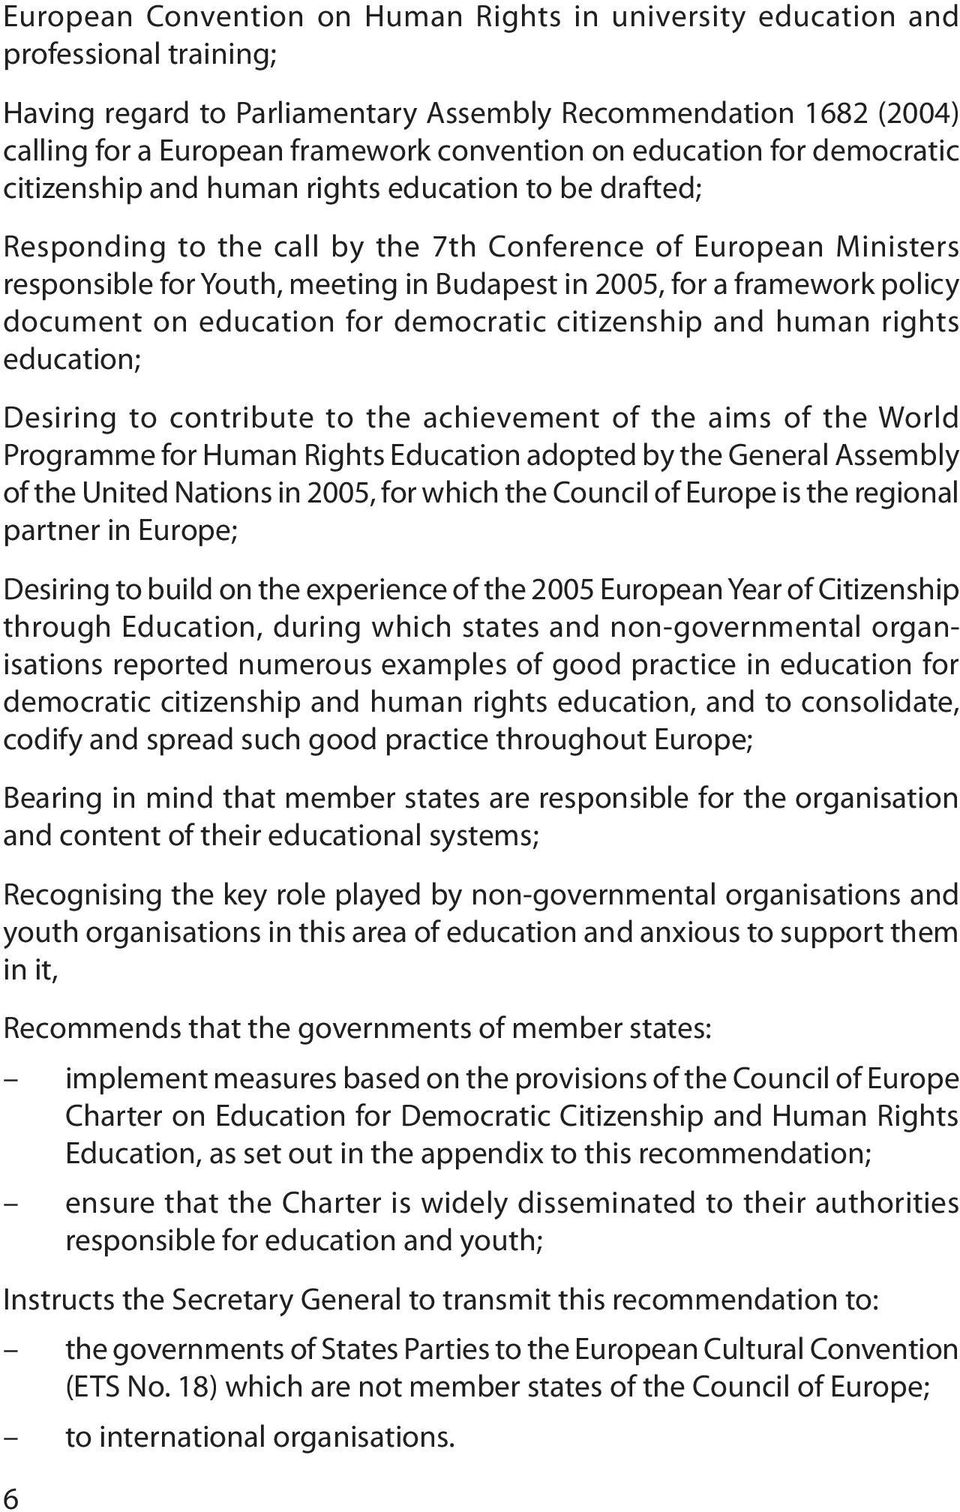 2005, for a framework policy document on education for democratic citizenship and human rights education; Desiring to contribute to the achievement of the aims of the World Programme for Human Rights